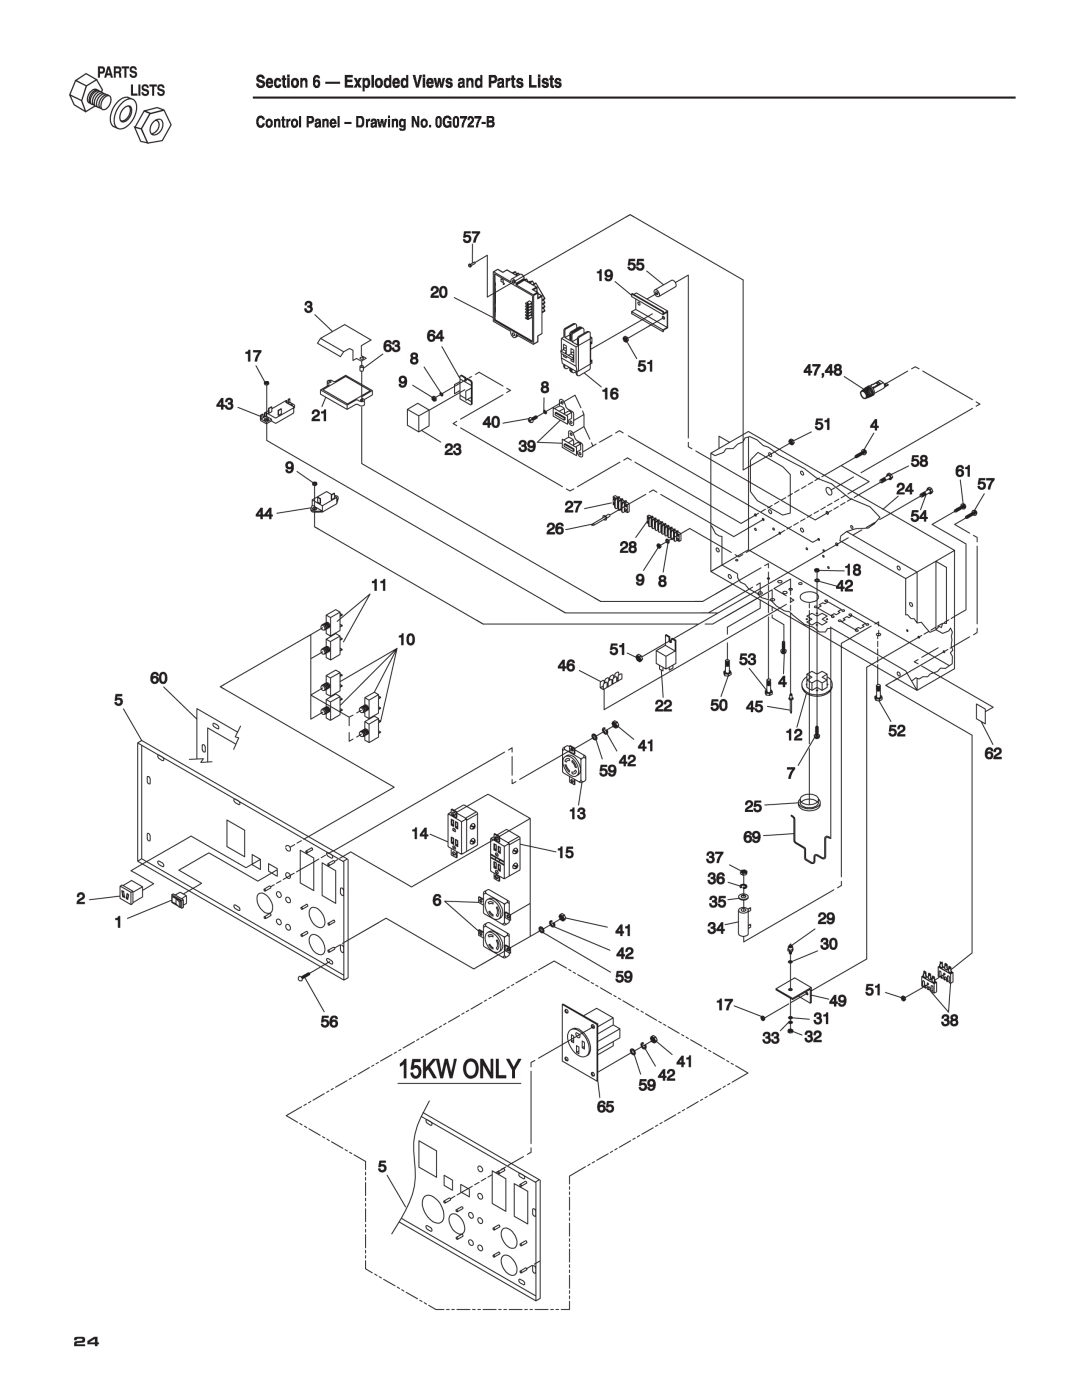 Guardian Technologies 004582-2 owner manual Exploded Views and Parts Lists, Control Panel – Drawing No. 0G0727-B 